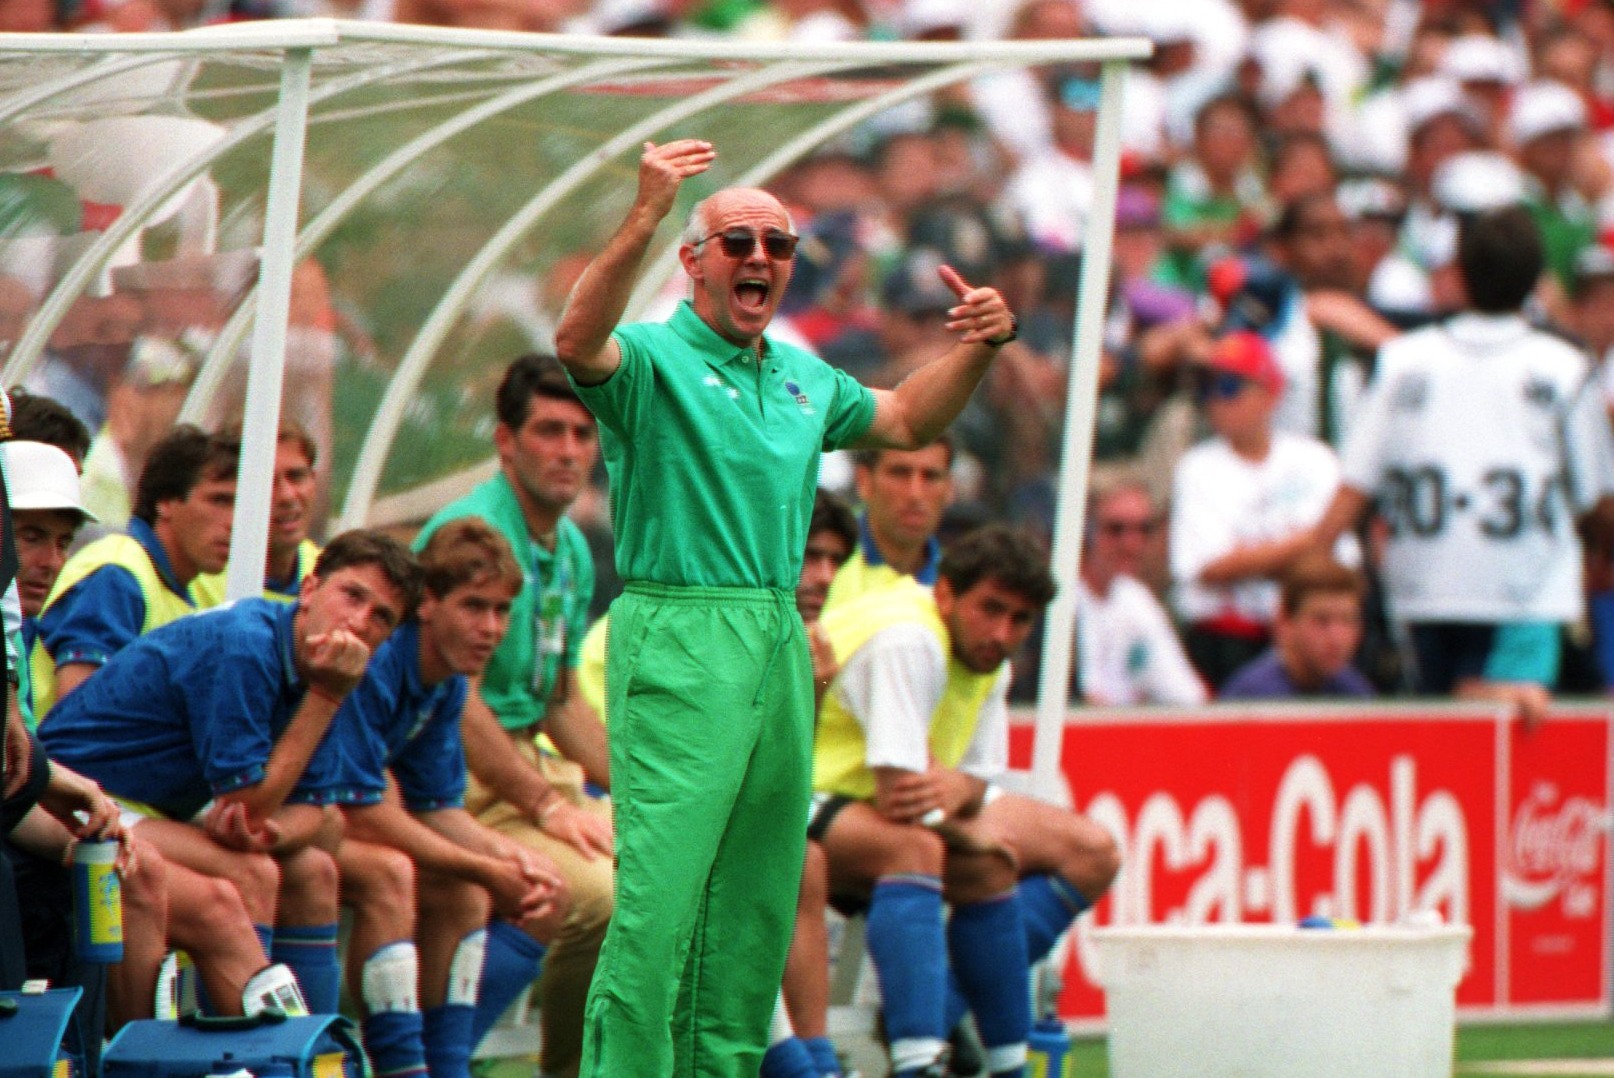 Arrigo Sacchi: From Selling Shoes to Football Glory